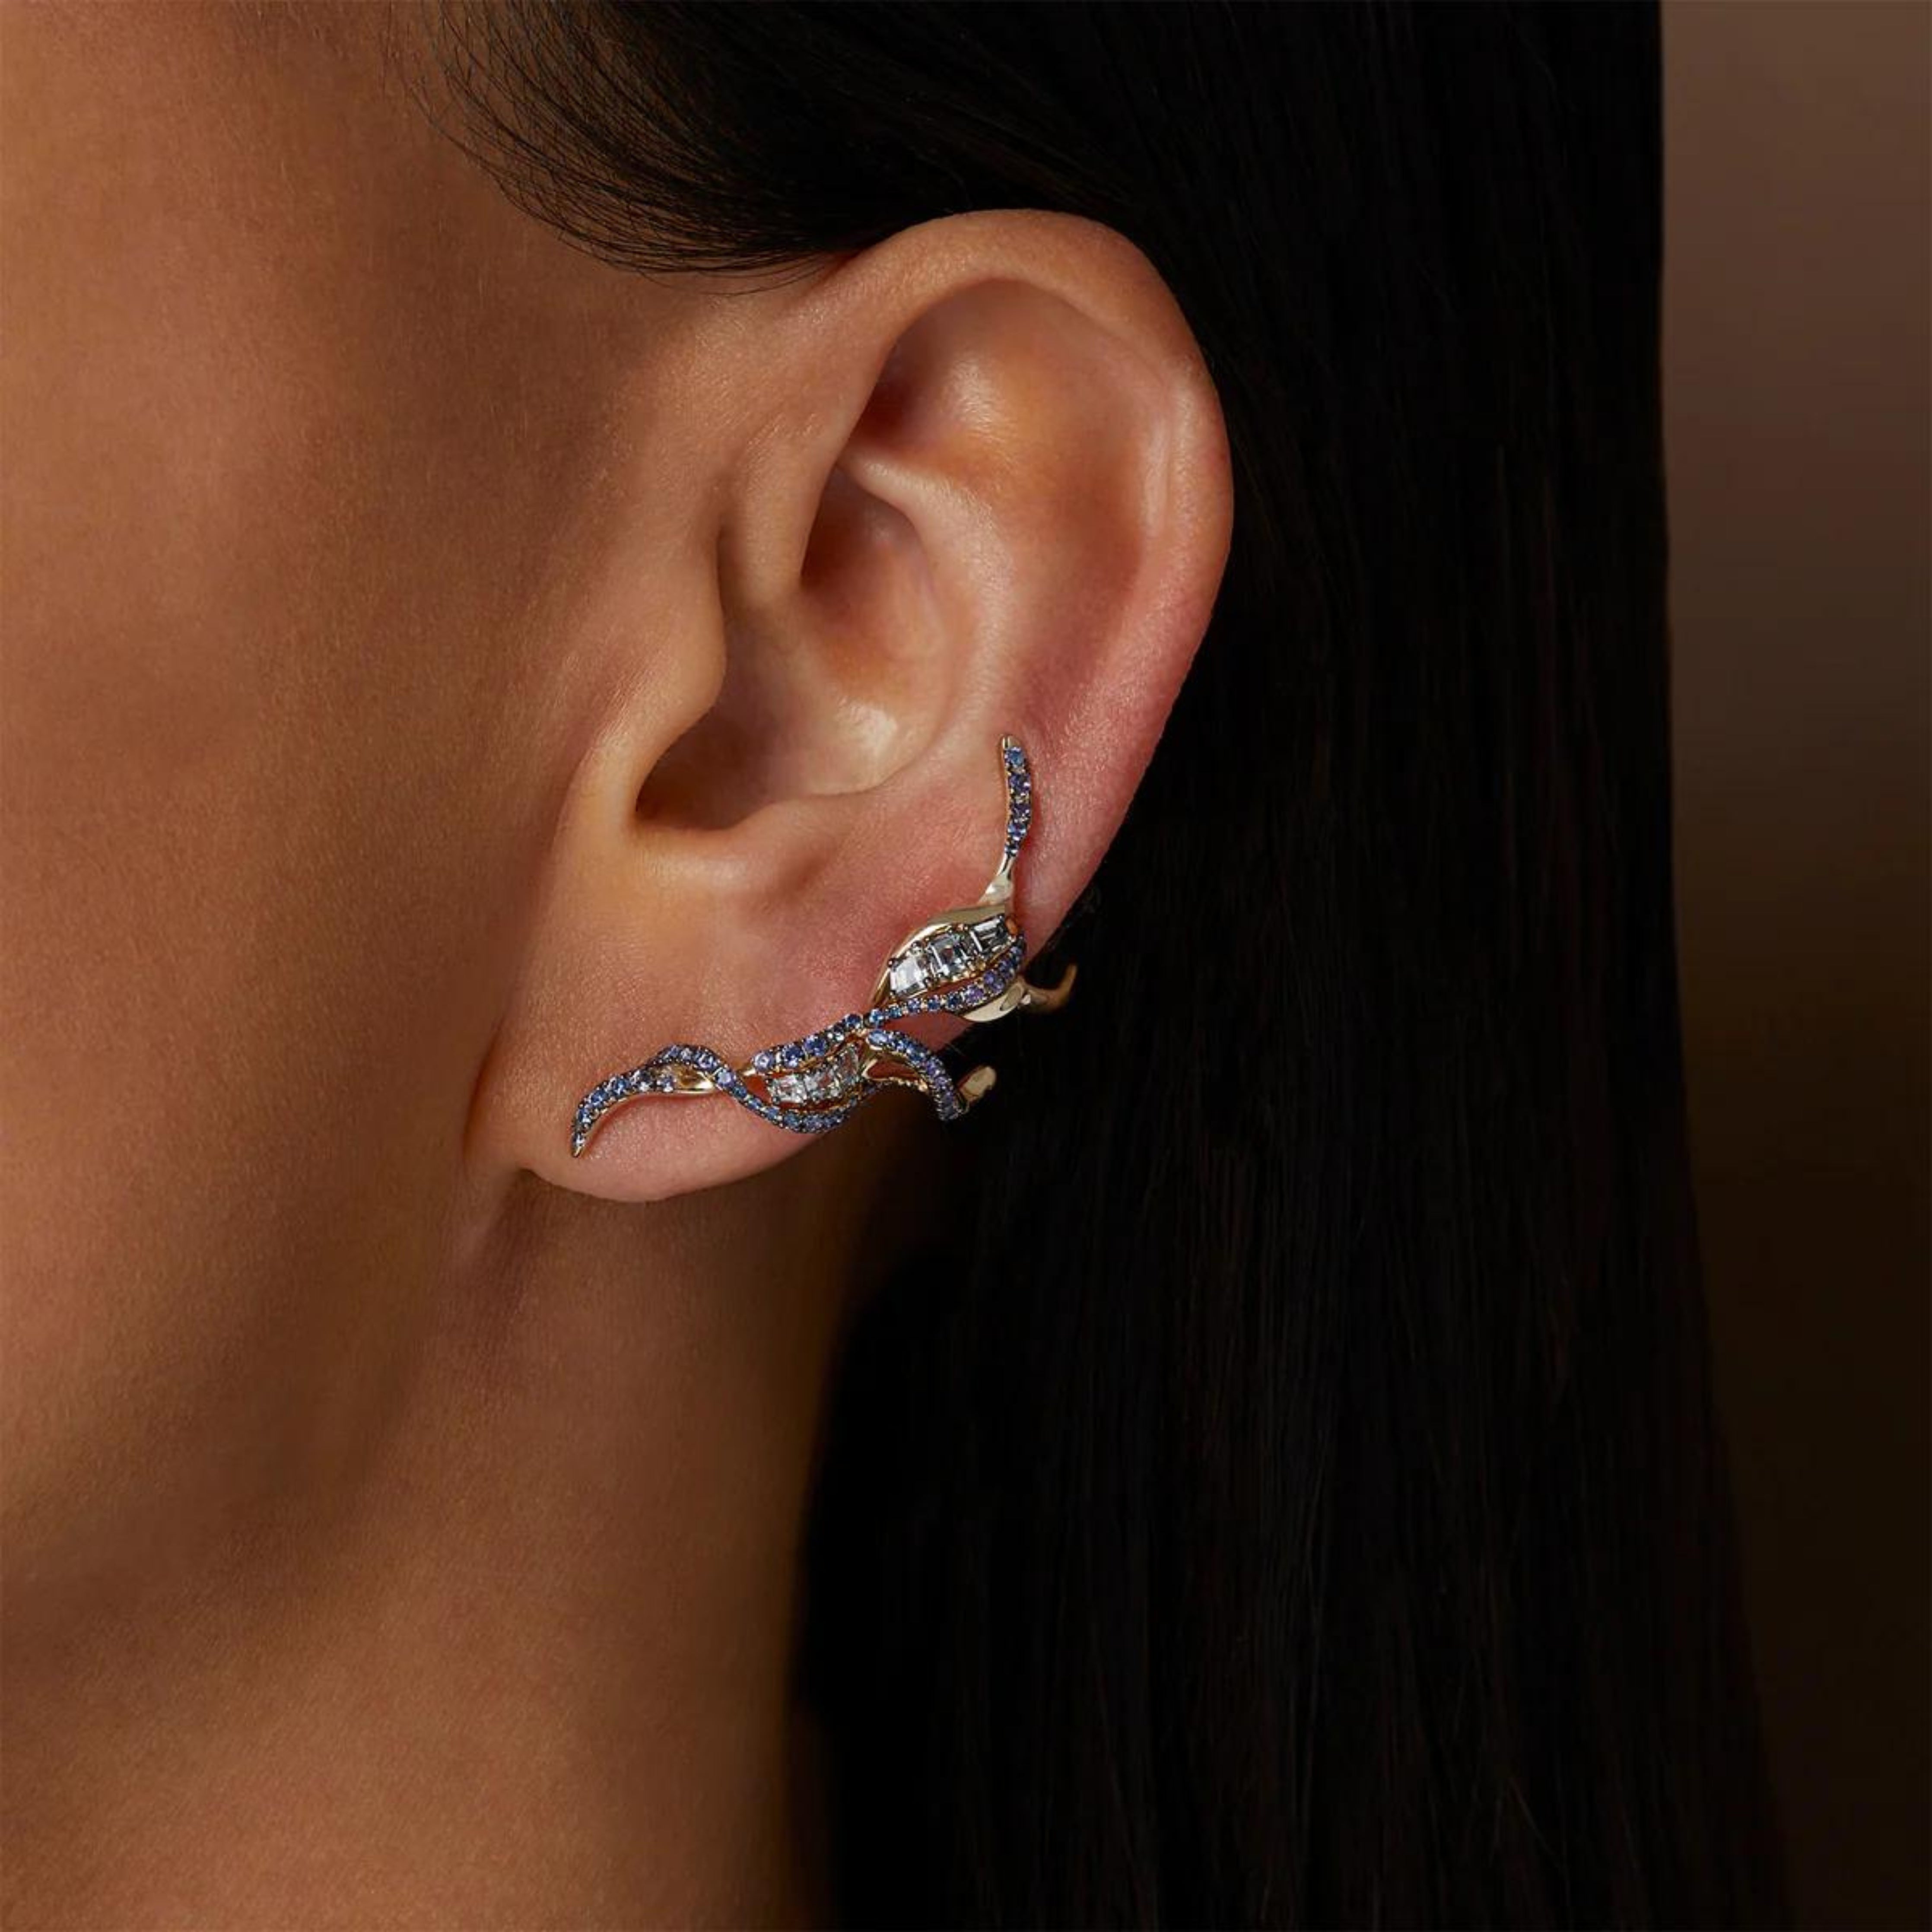 Bibi van der Velden Puff Ear Climber in Blue Sapphire. shades of blue and grey sapphires and spinels adorn the Puff Ear Climber&#39;s 18k white gold tendrils. Delicately crafted, this climber elegantly pierces the ear lobe and sweeps up the ear&#39;s outer edge. Photo of model wearing earring.